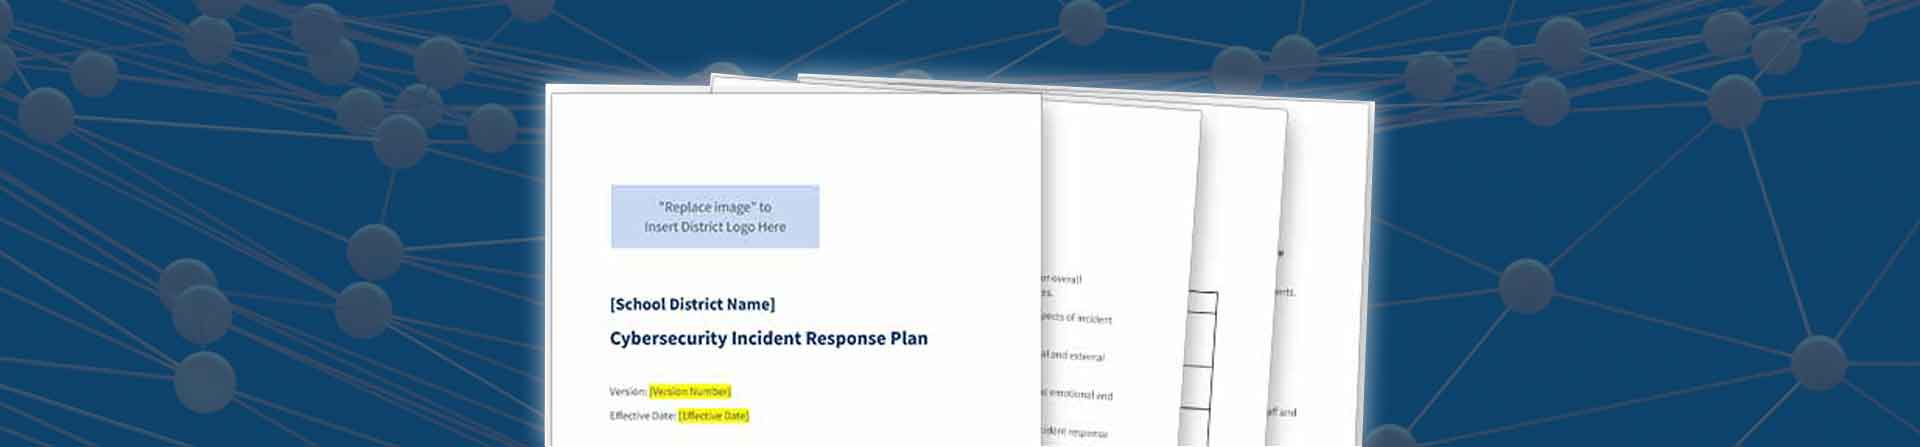 cyber attack disaster recovery template